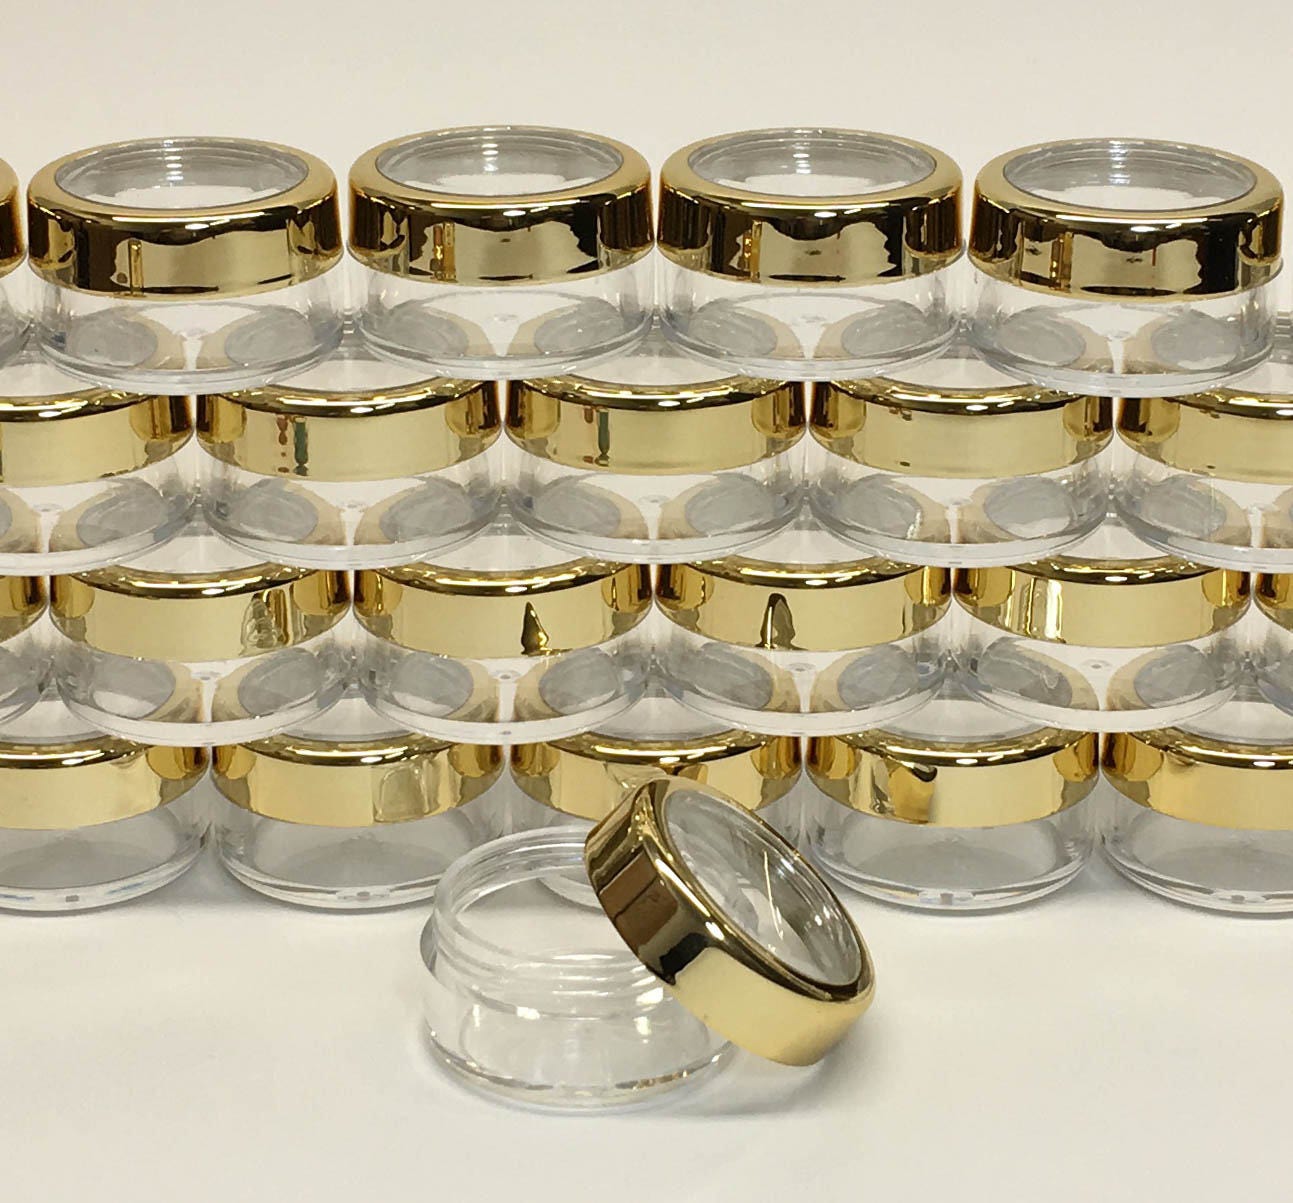 100 Empty Cosmetic Jars Wholesale Empty Plastic Lip Balm Beauty Containers Gold Trim Acrylic Lid 10 Gram 10 Ml (3012-100) Discount Cosmetic Jars